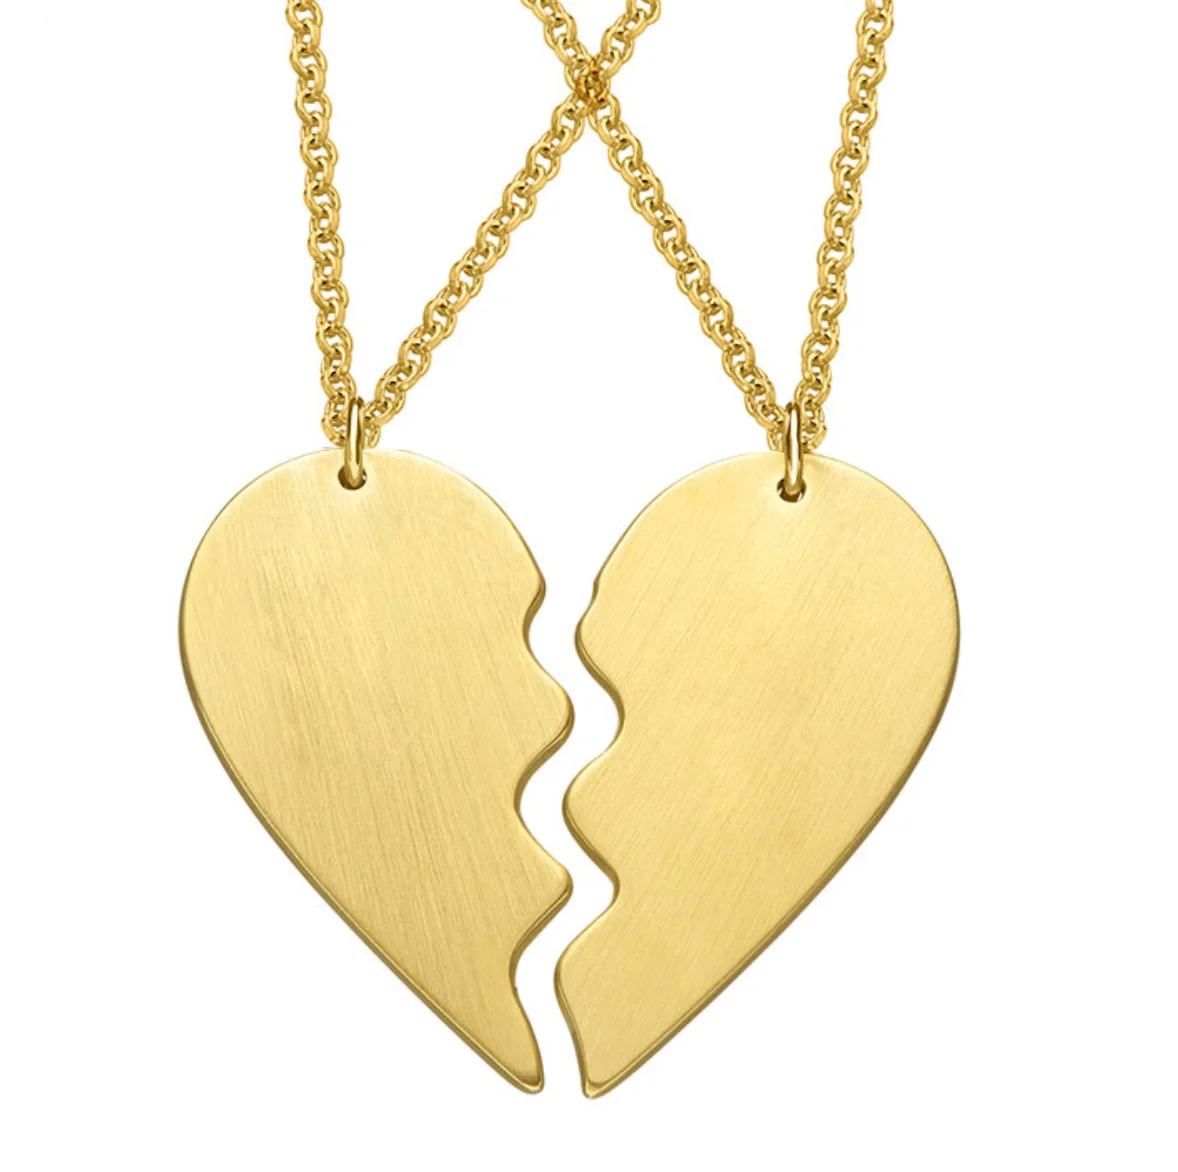 Golden Peacock Silver Two Piece Heart Shaped Love You Couples Necklace Set